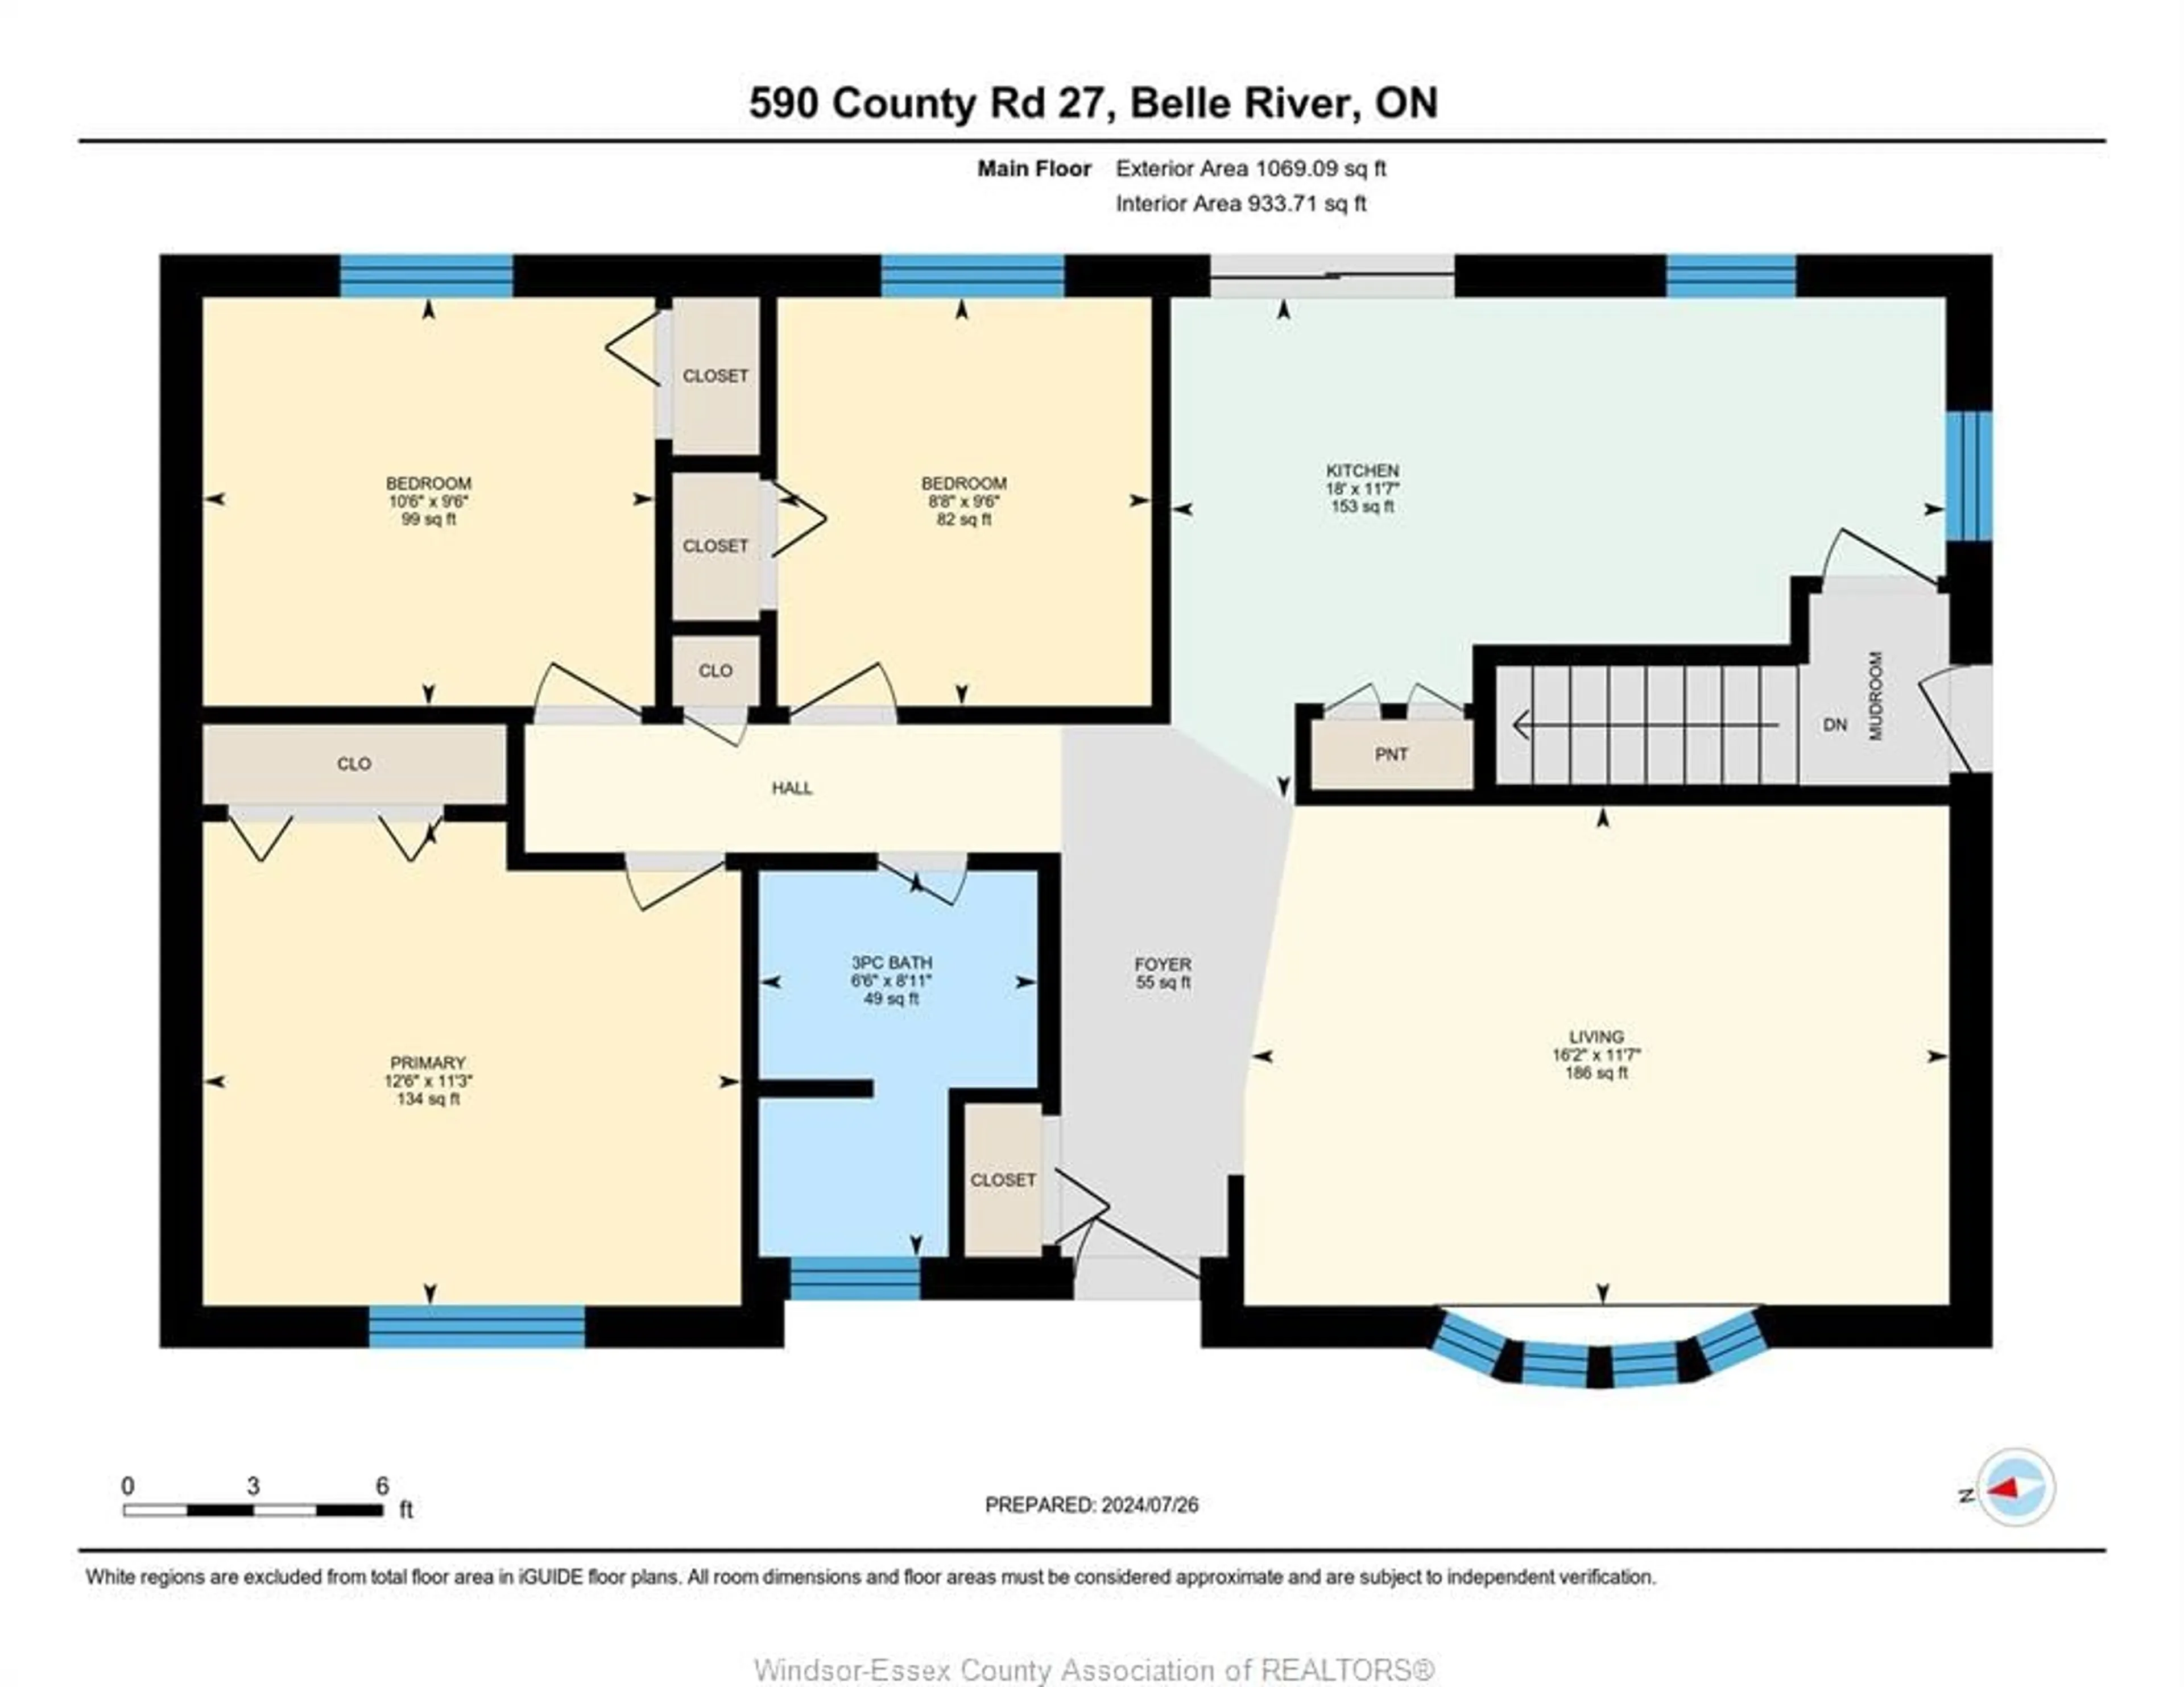 Floor plan for 590 COUNTY RD 27, Lakeshore Ontario N0R 1A0